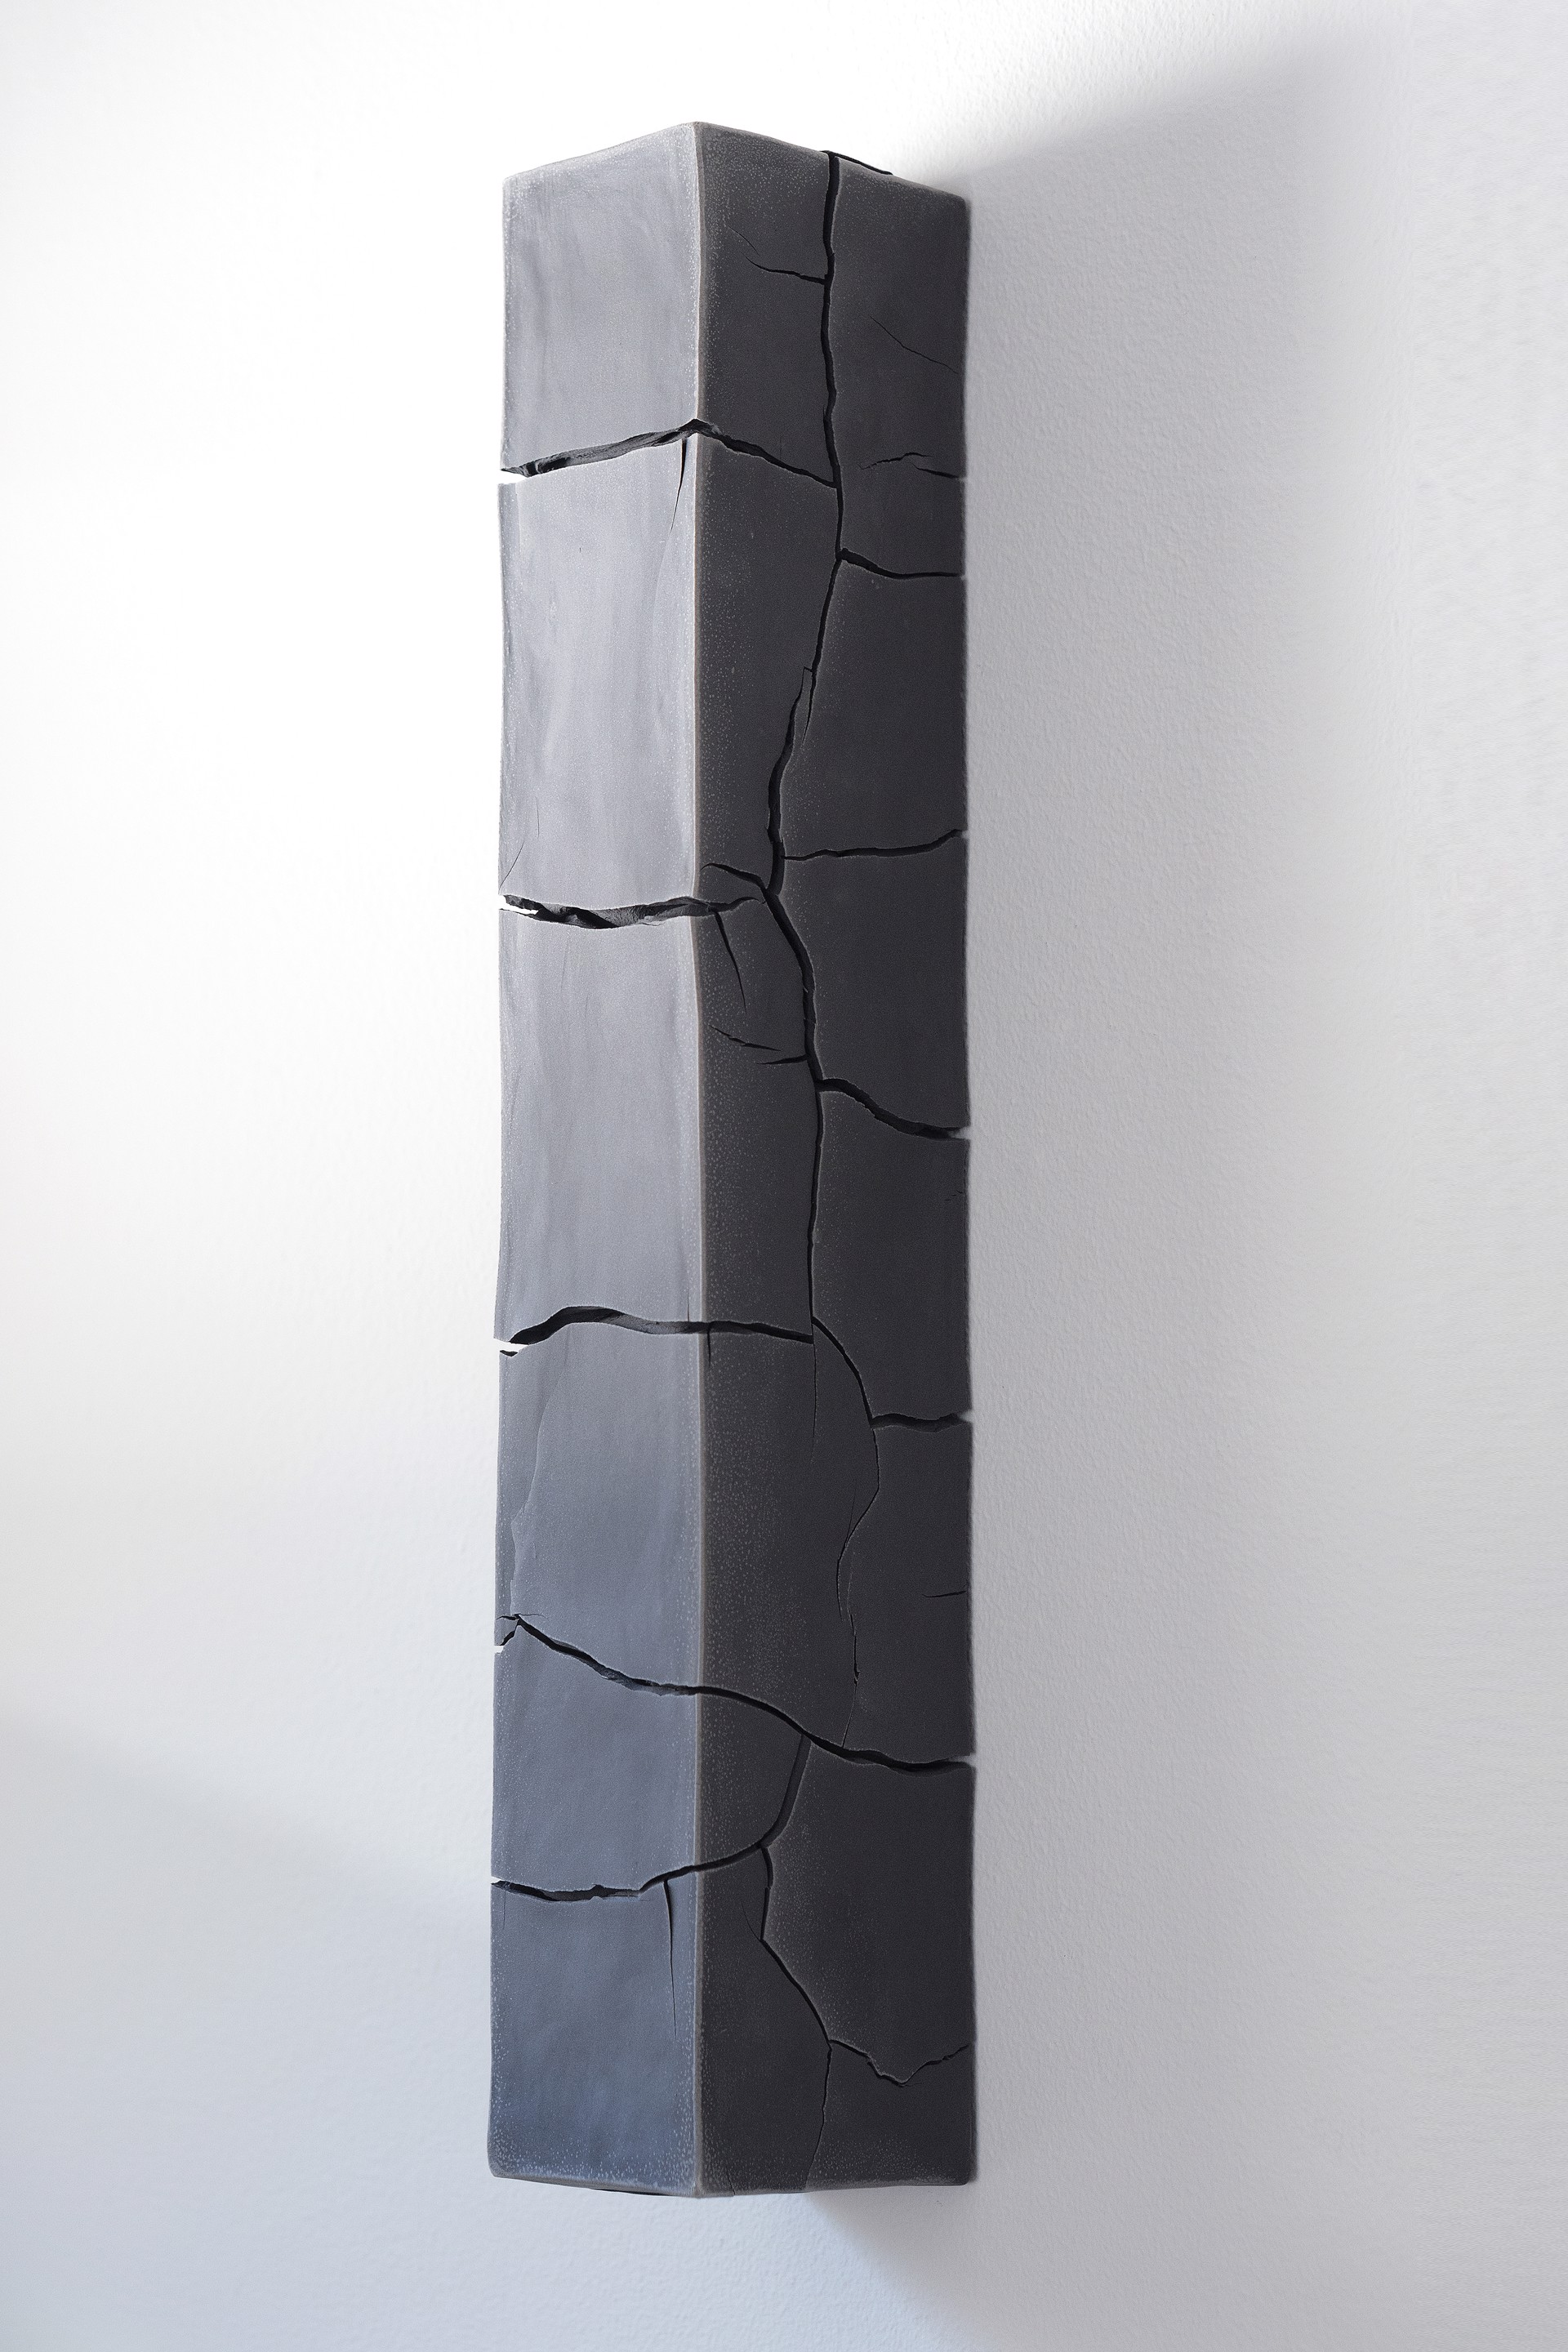 Black Porcelain Wall Object by Liza Riddle